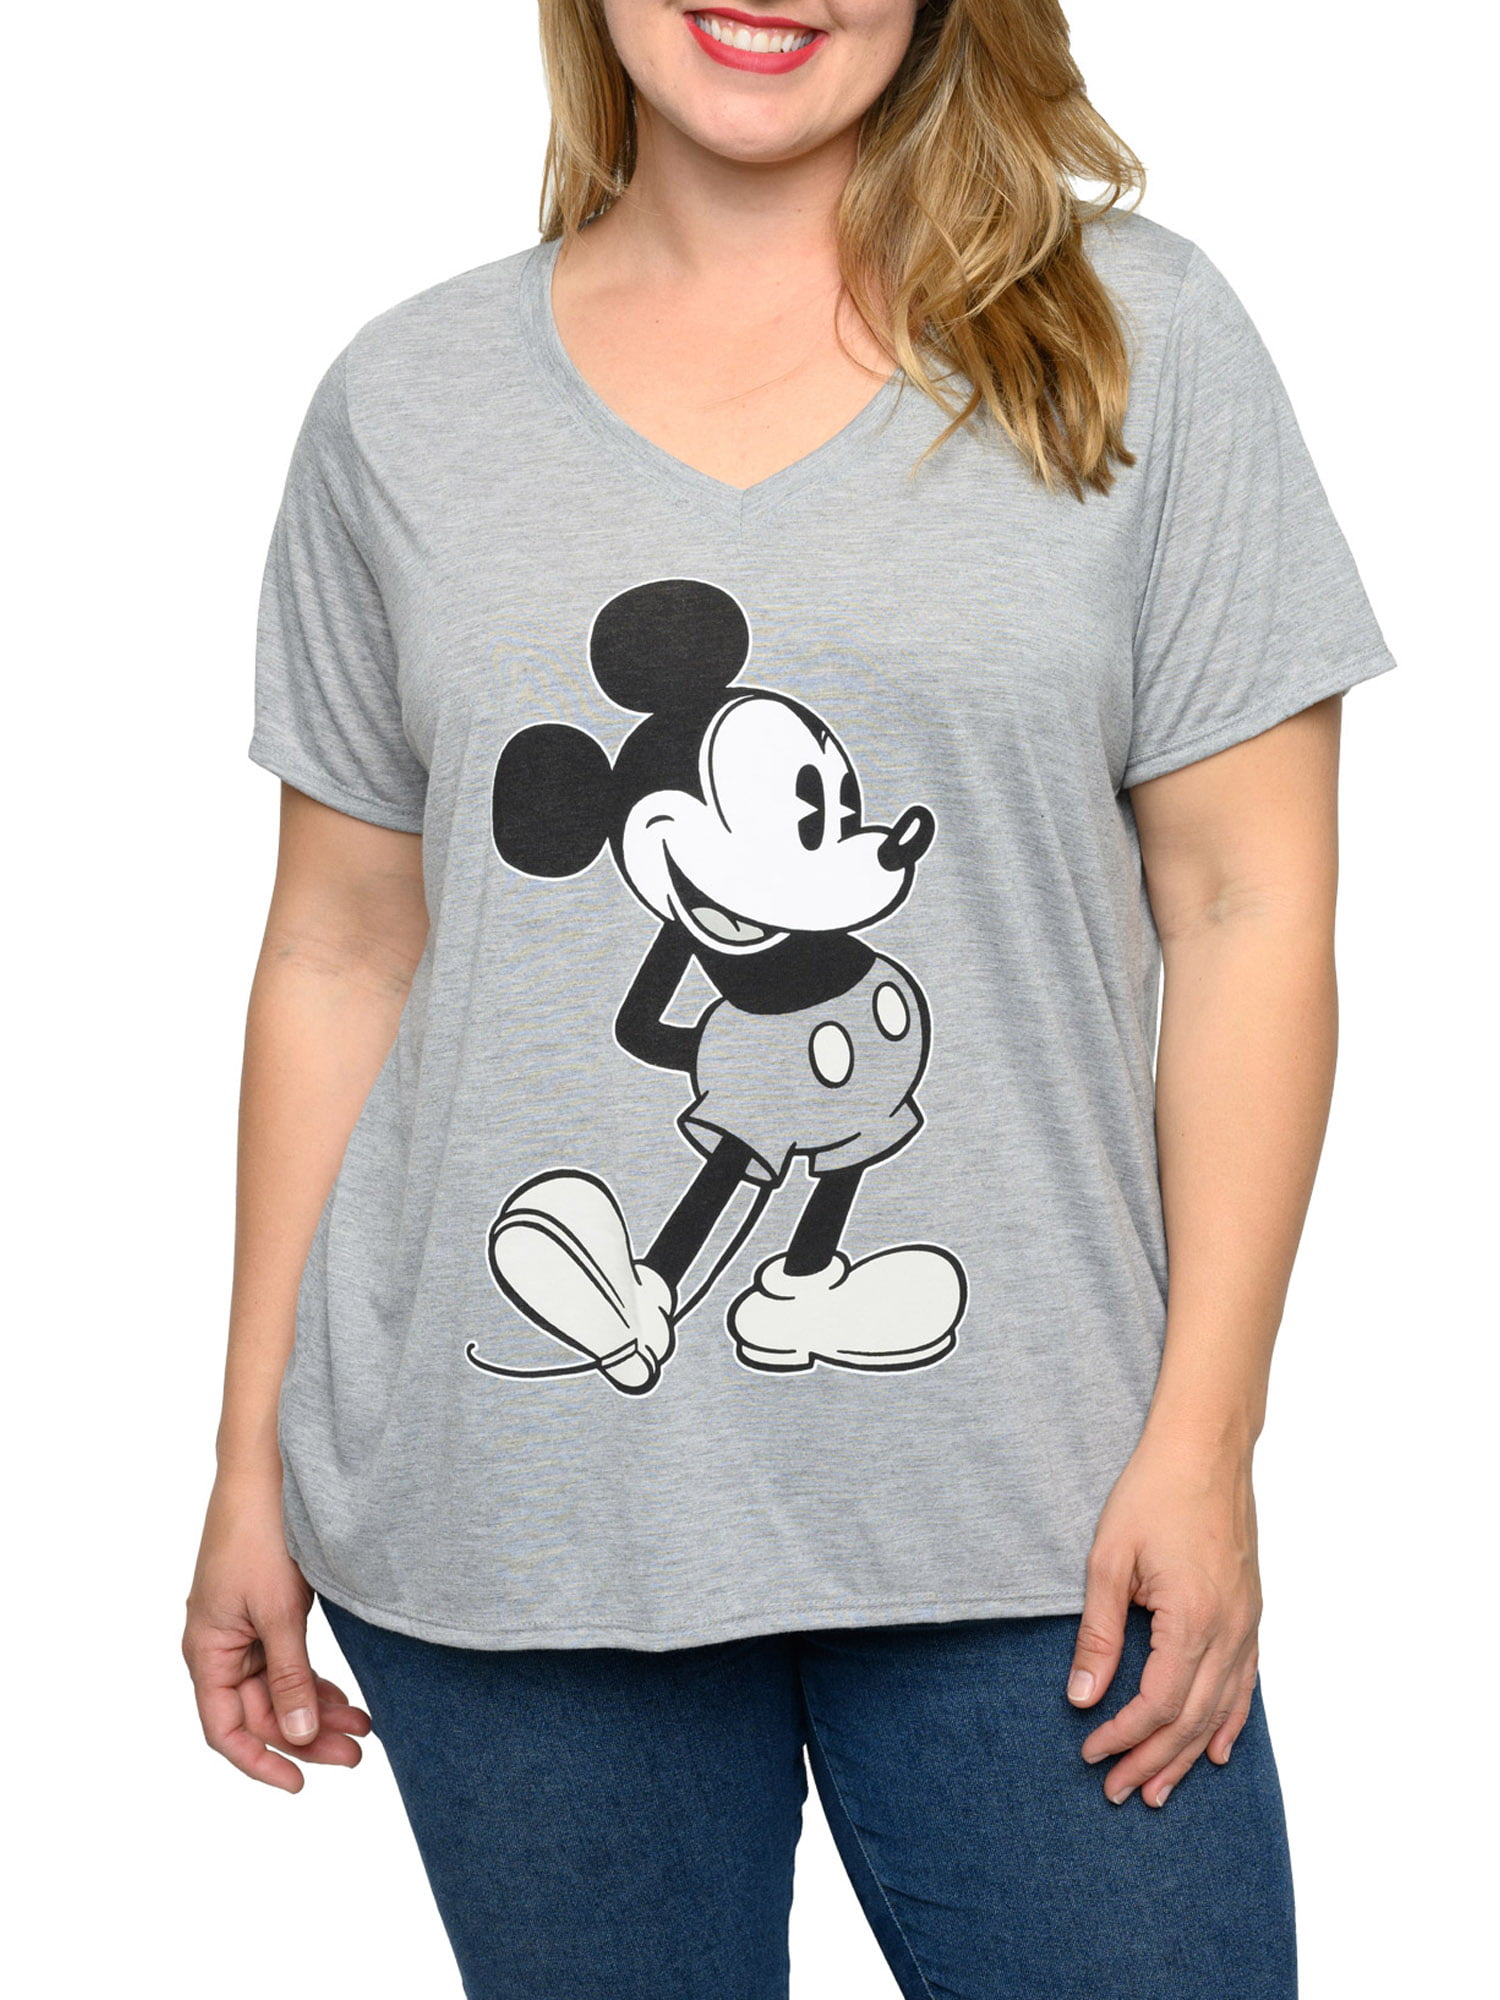 HOT SALE【Plus Size/40-150KG】Disney Mickey Oversized Korean Style Women Plus  Size Striped T-shirt Short Sleeves BIg Loose Mickey Printed Summer Tee  Maternity Pregnancy T-shirt Round Neck Casual Top Fashion Big Size  Medium-Long Length